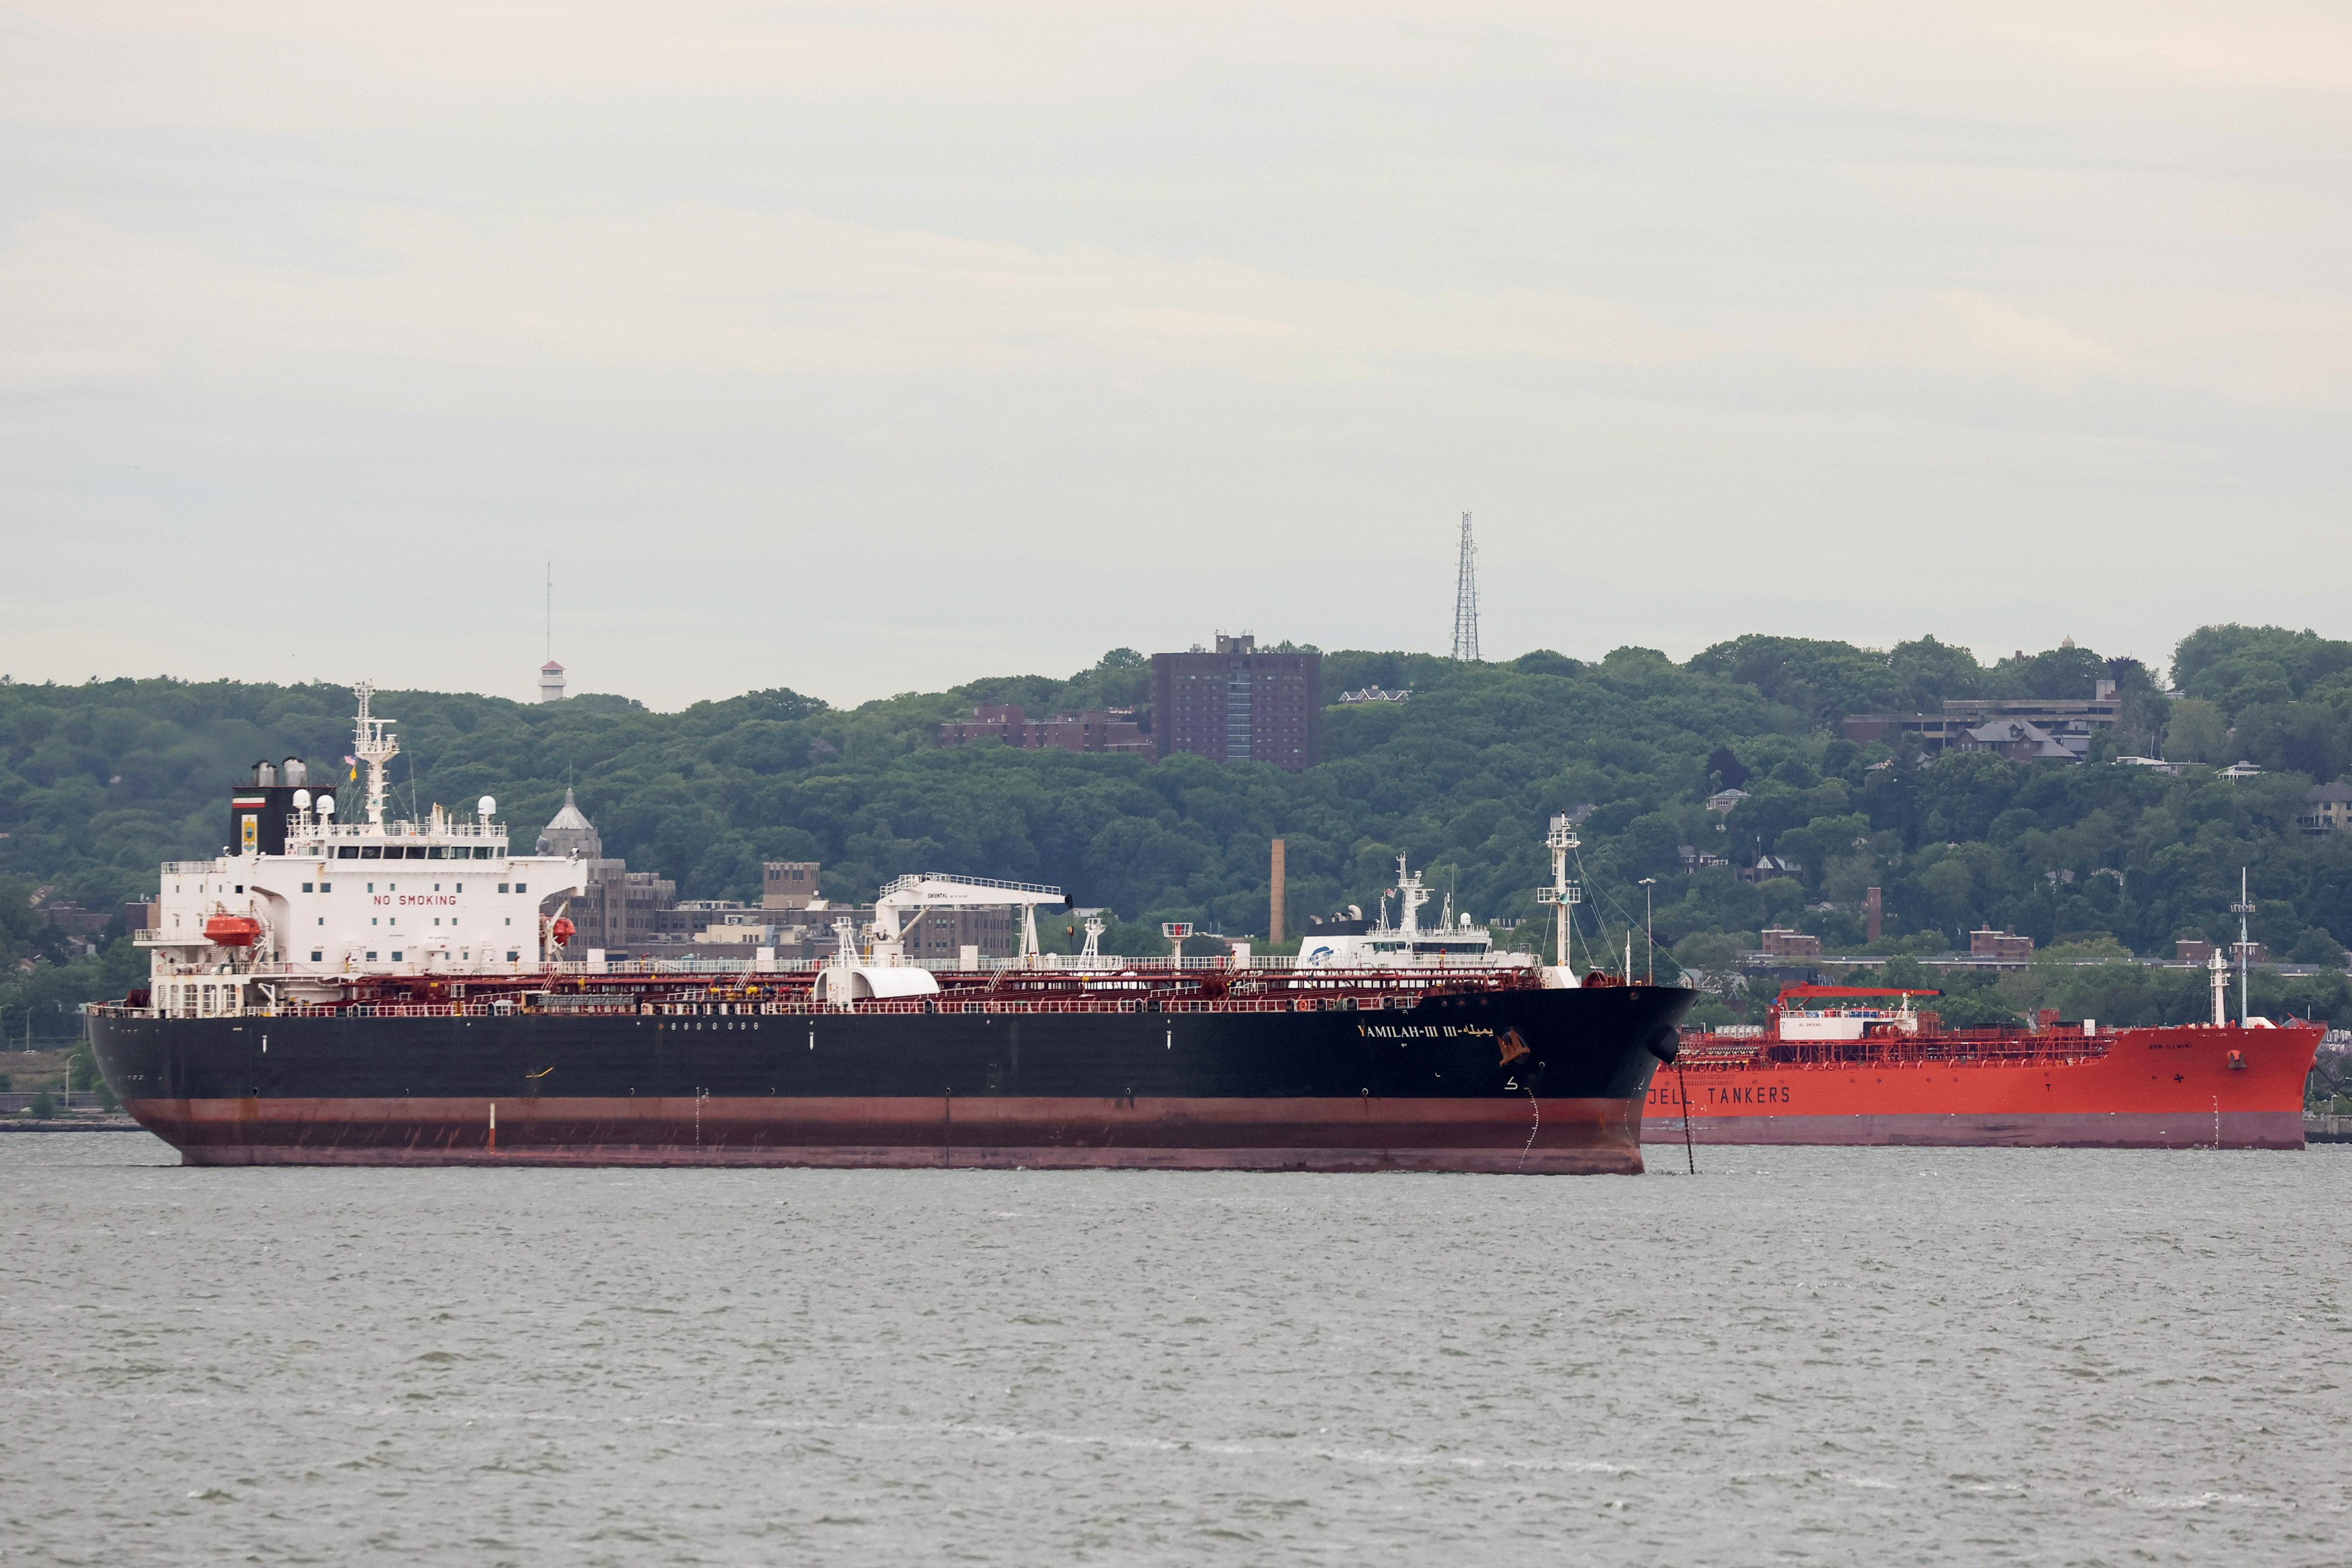 The Yamilah III, an oil tanker is seen anchored in New York Harbor